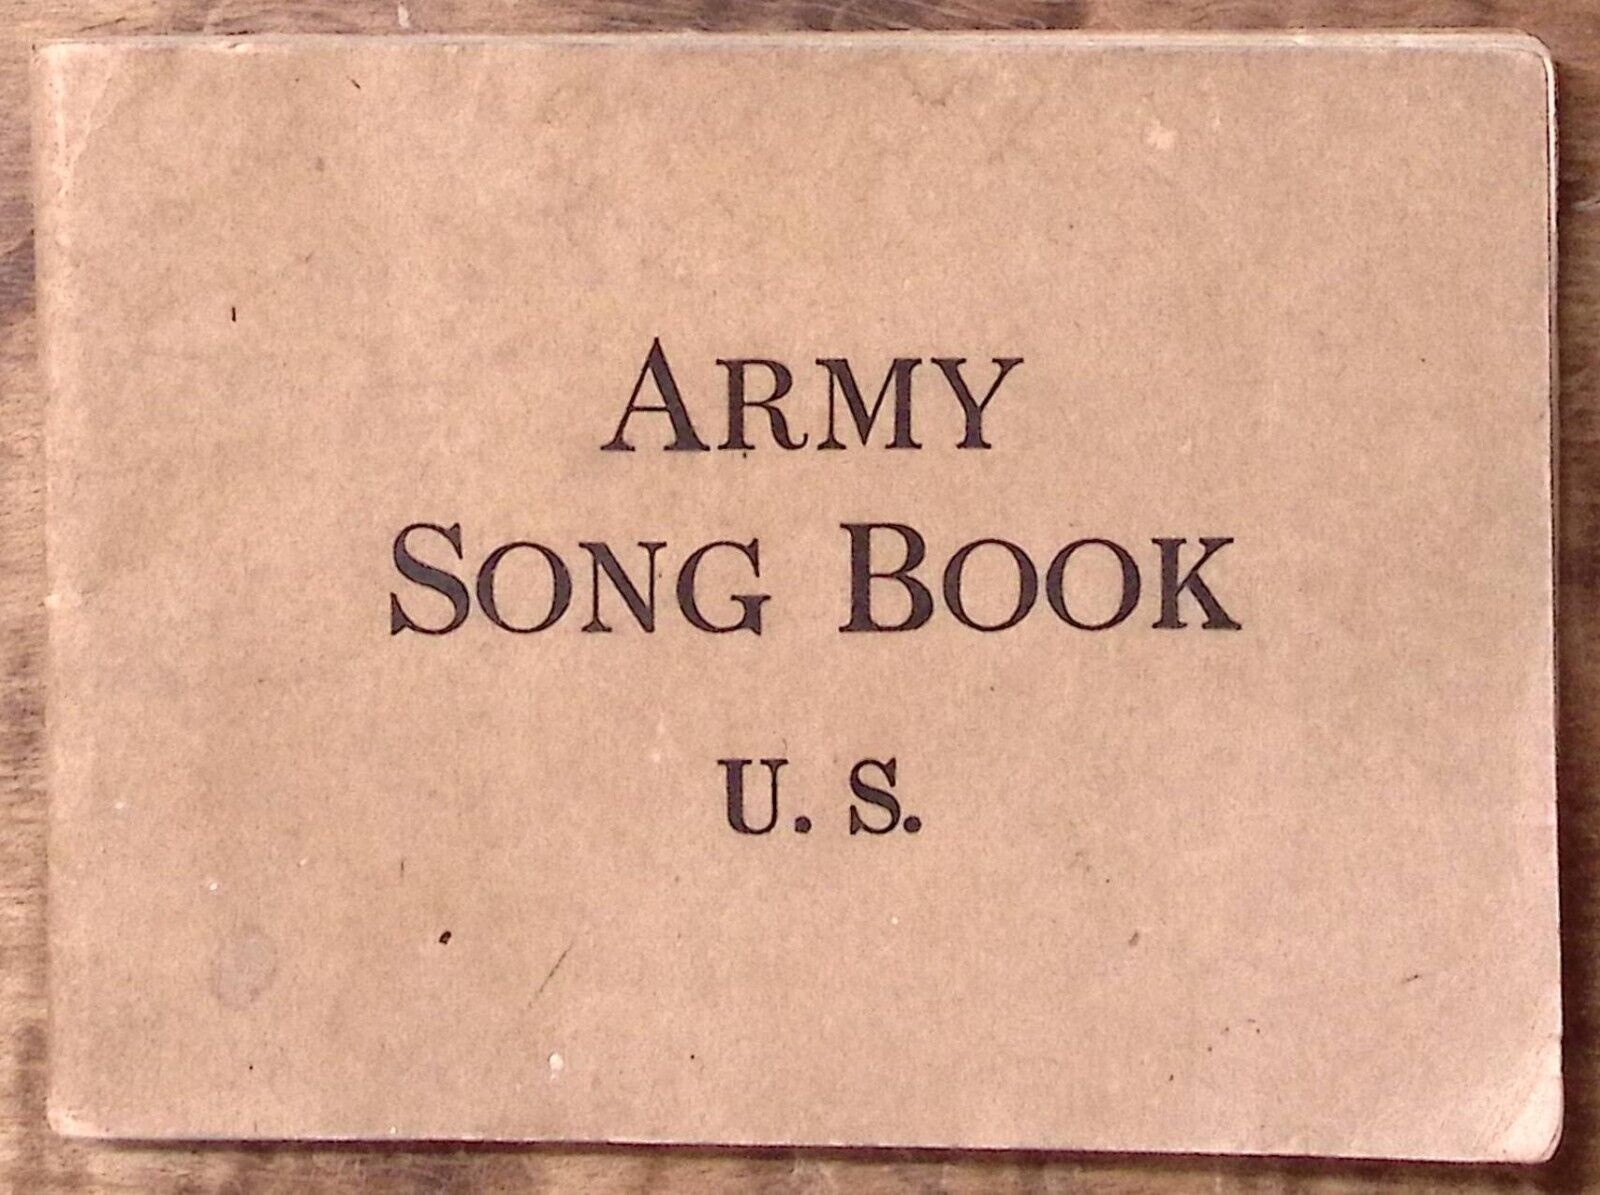 1918 WWI U.S. ARMY SONG BOOK ISSUED BY WAR DEPT 90 PAGES Z5349